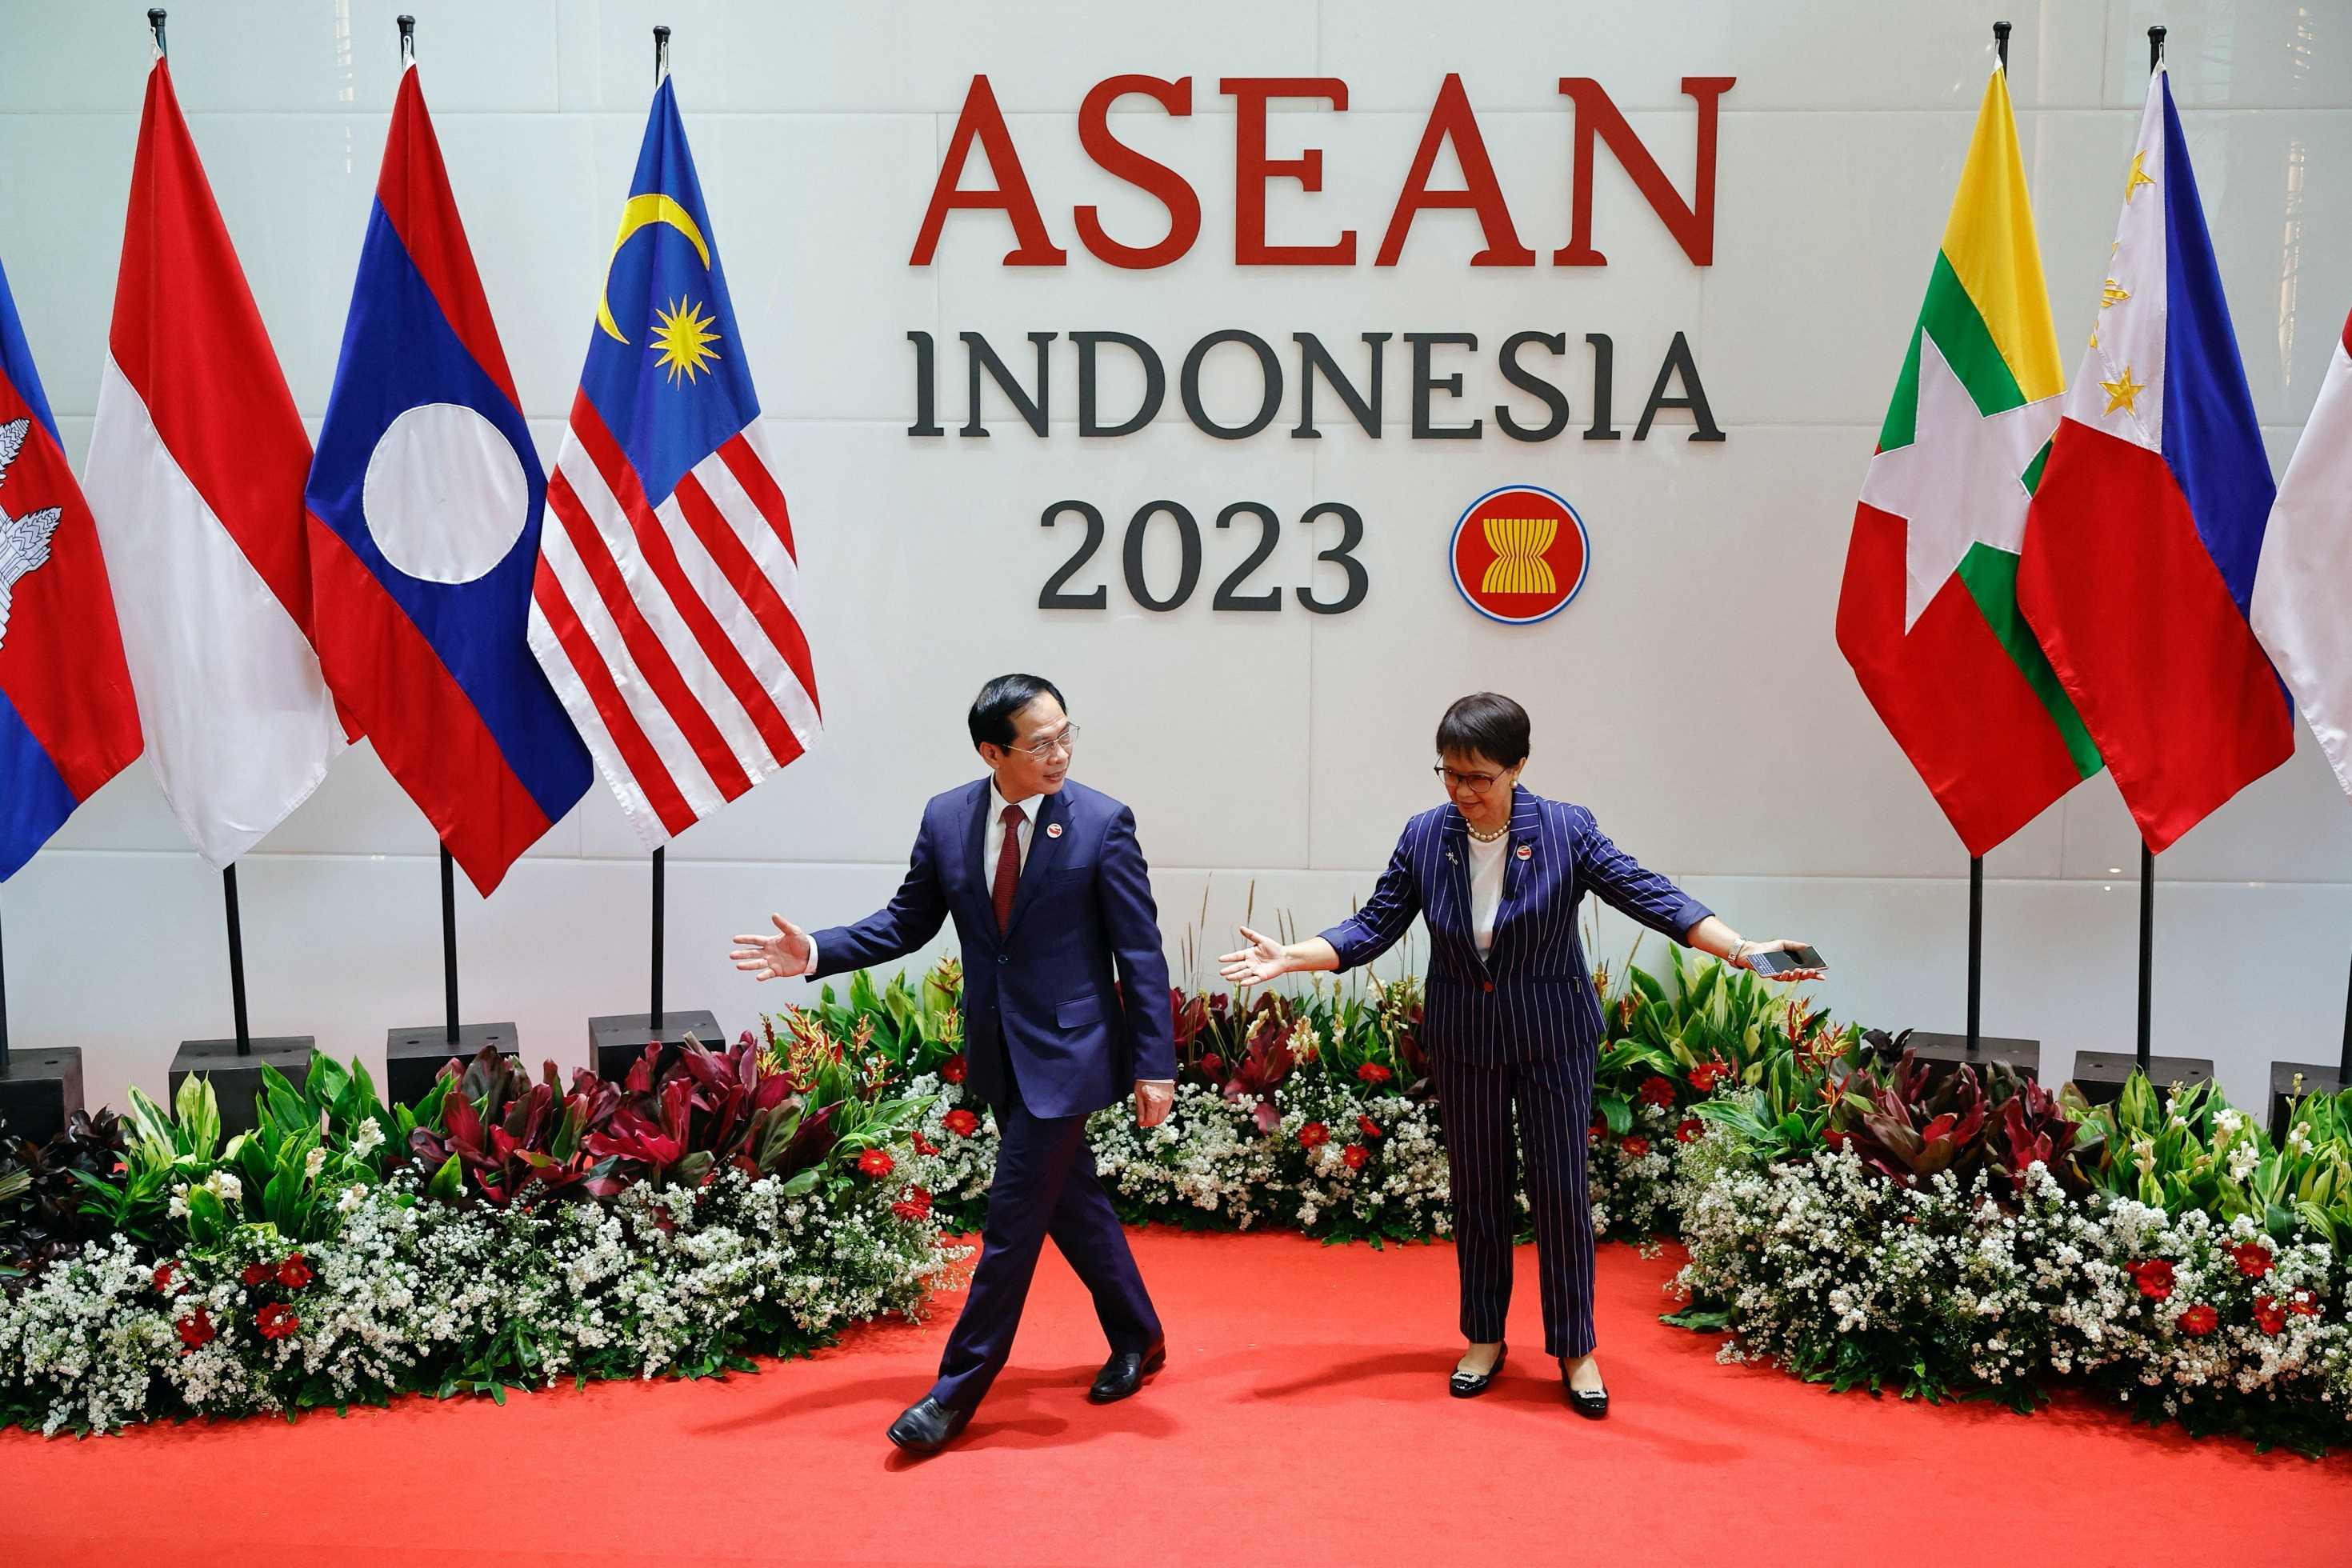 Indonesian Foreign Minister Retno Marsudi welcomes Vietnam's Minister of Foreign Affairs Bui Thanh Son for the 32nd Asean Coordinating Council (ACC) Meeting at the Asean Secretariat in Jakarta, Indonesia, Feb 3. Photo: Reuters